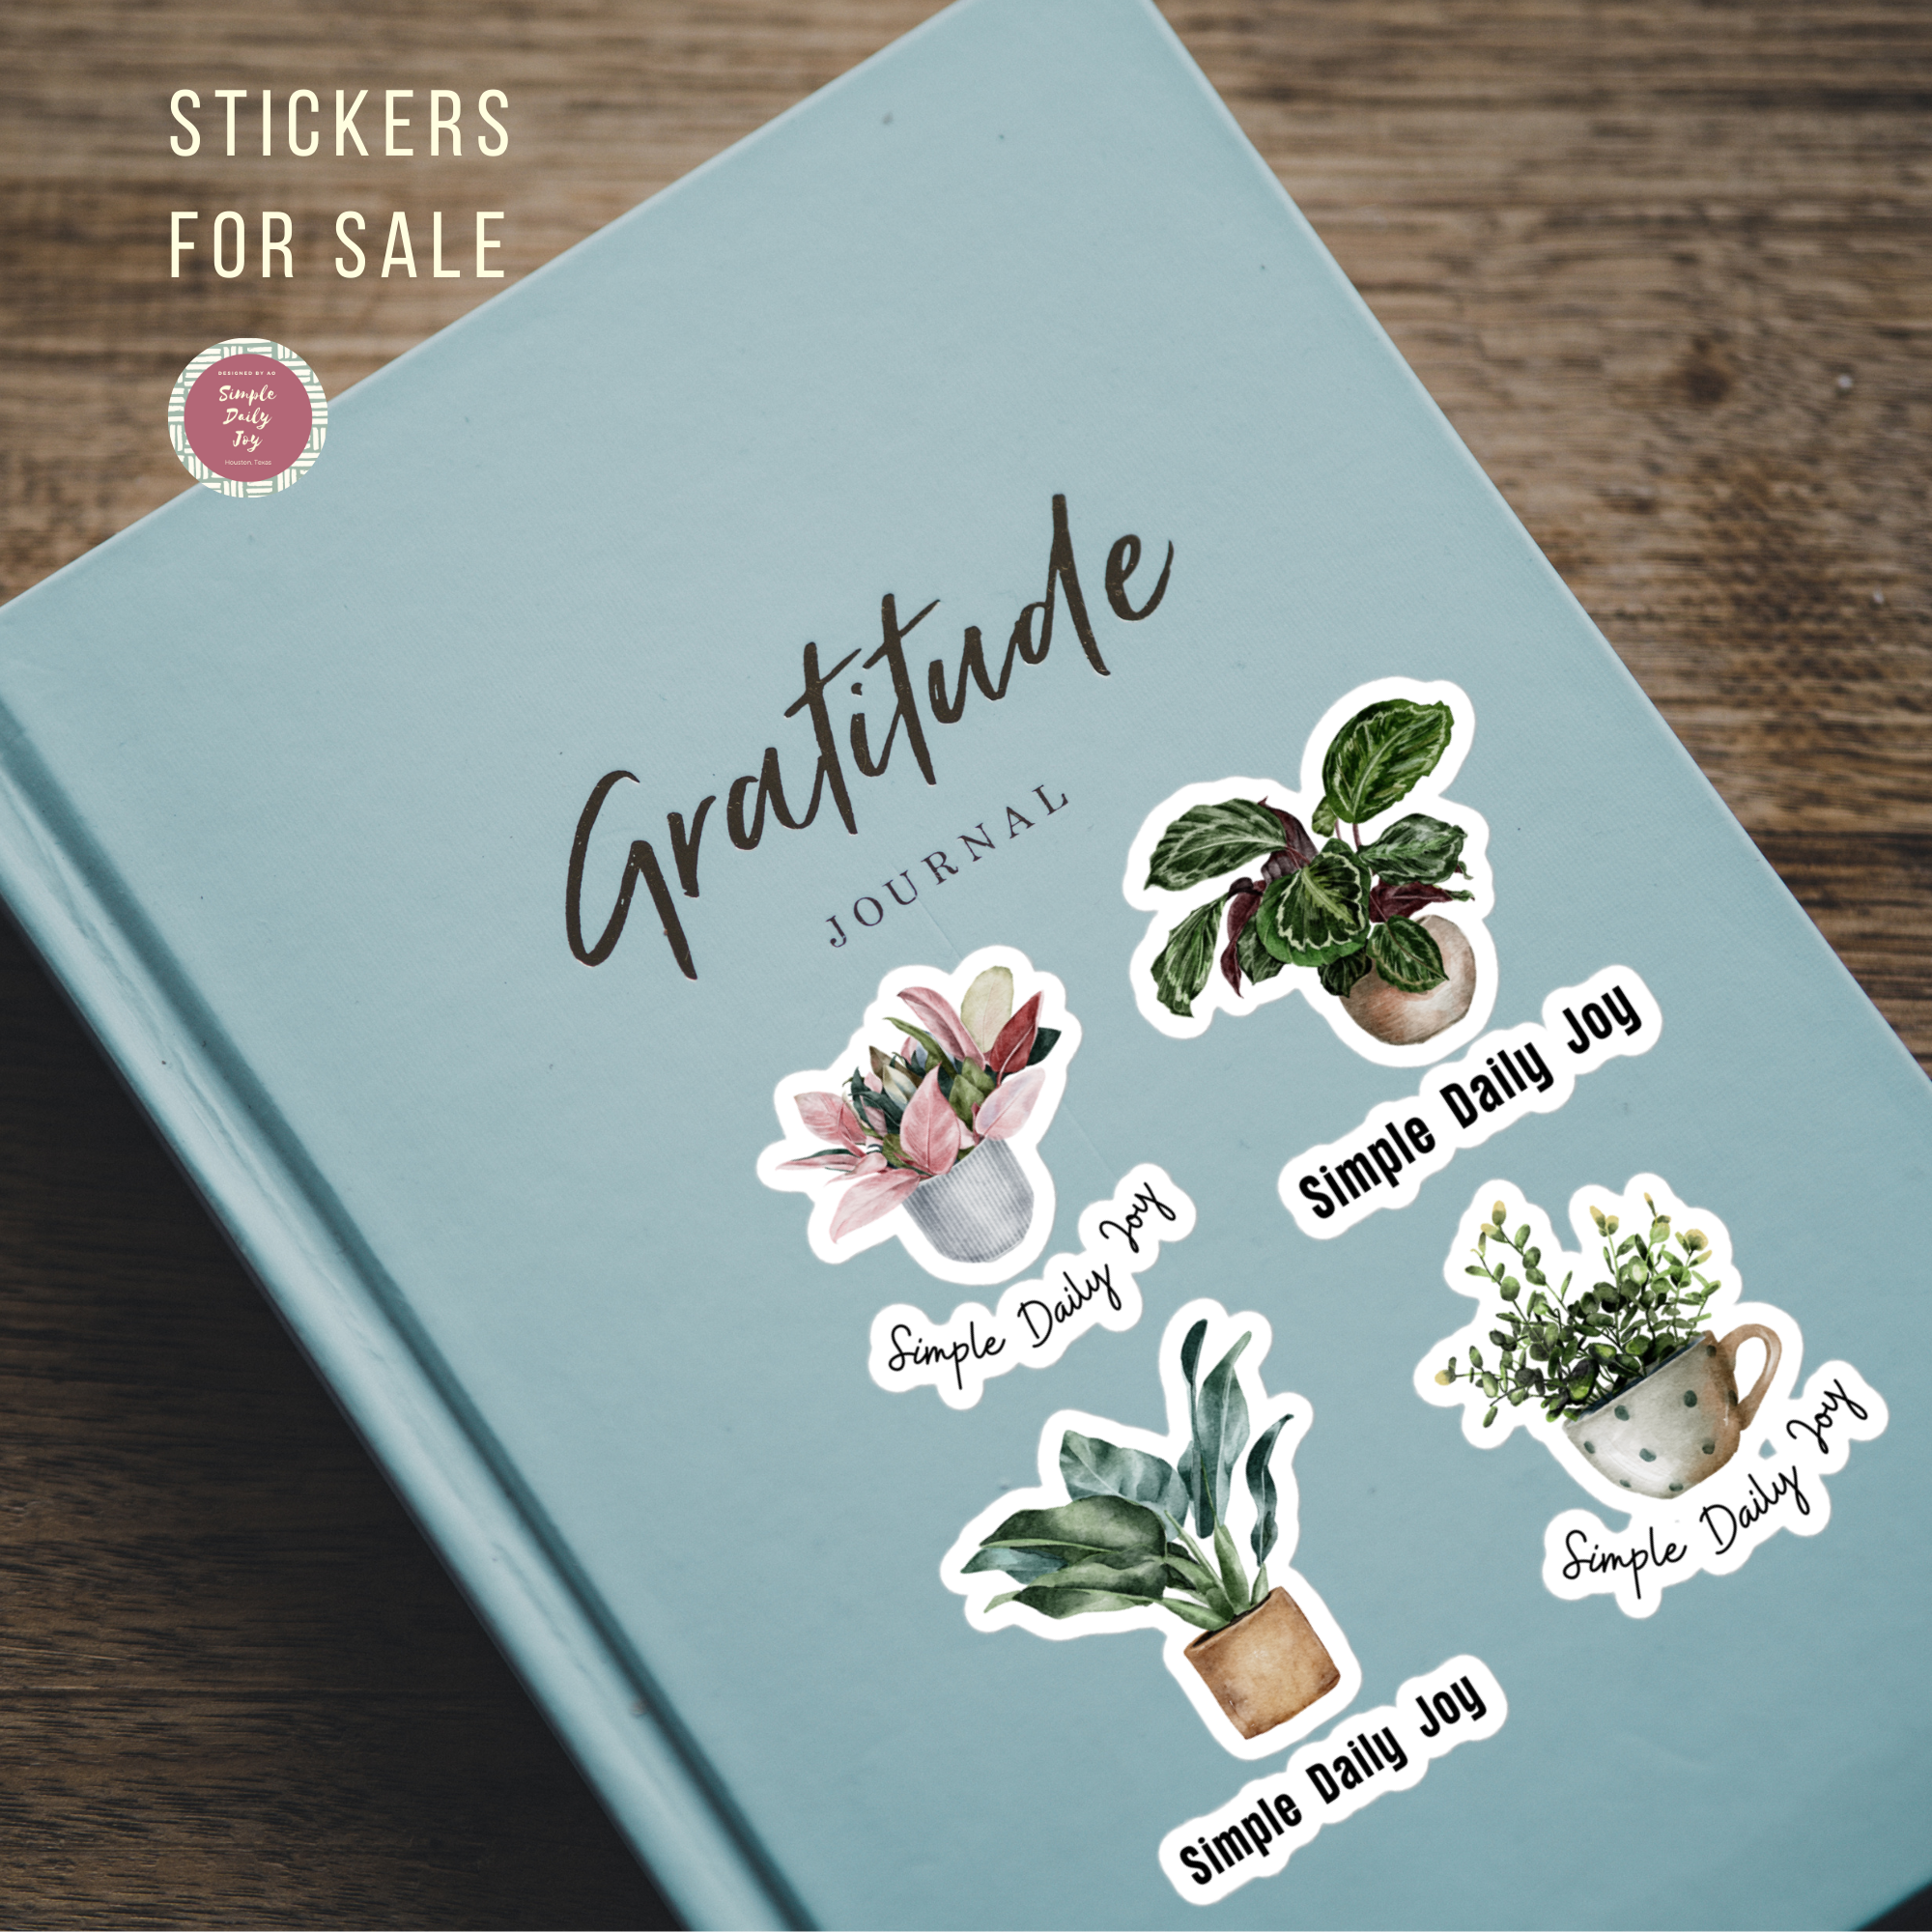 PLANT LOVER GIFTS STICKERS, 4 in 1 Sticker Sheet